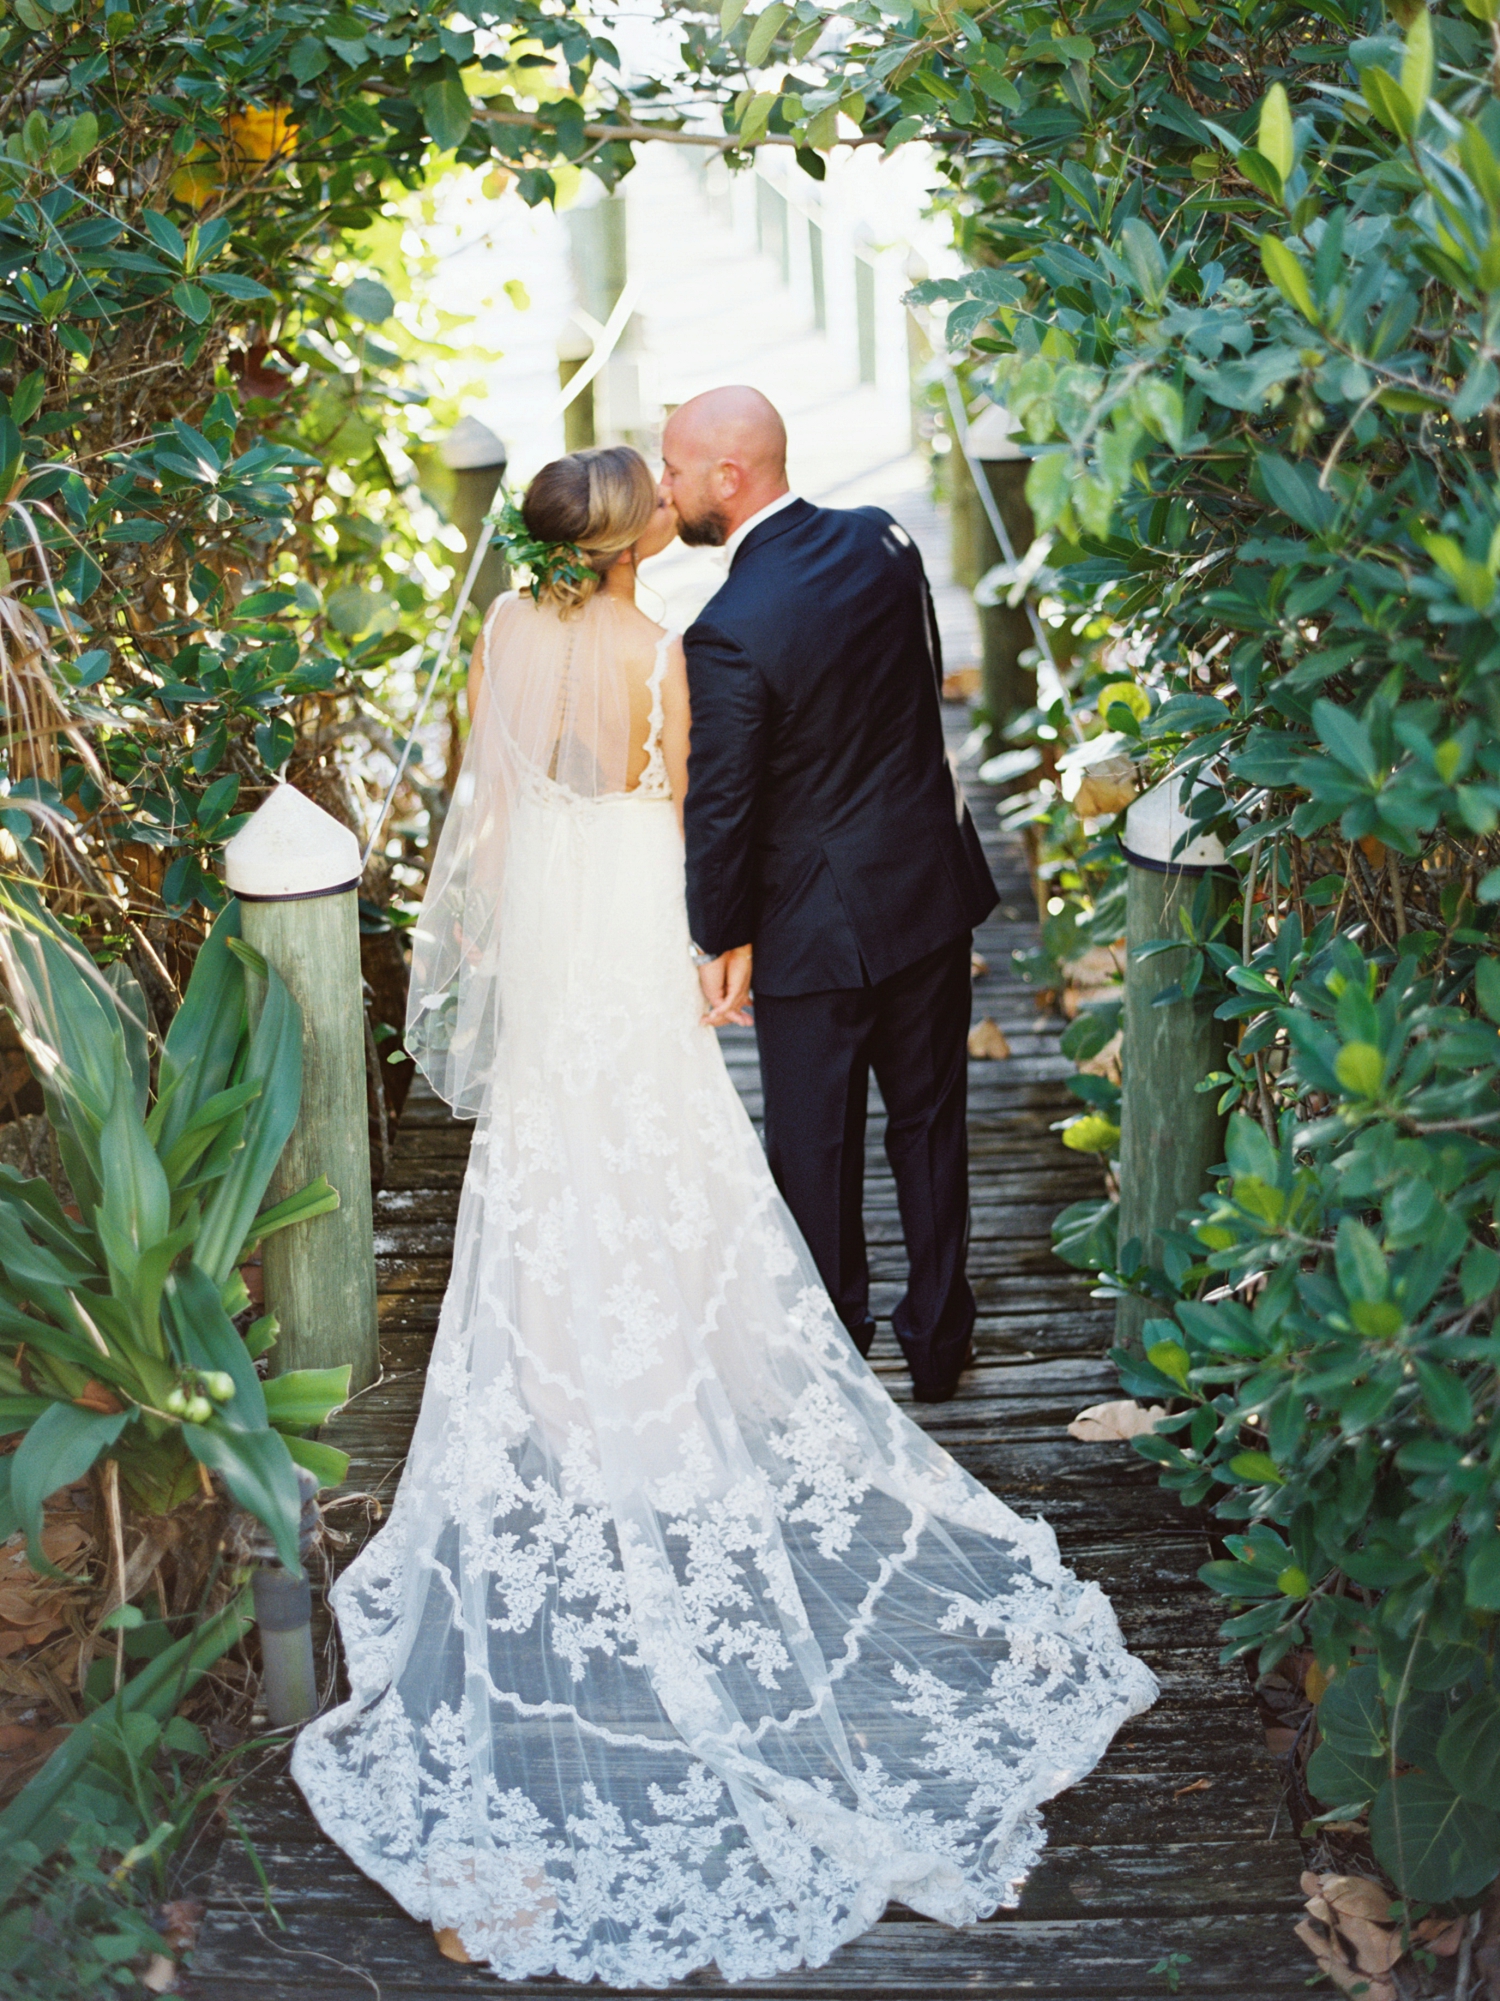 stella york wedding gown, white rose and greenery bouquet, lace wedding gown, navy groom suit, groom outfit ideas